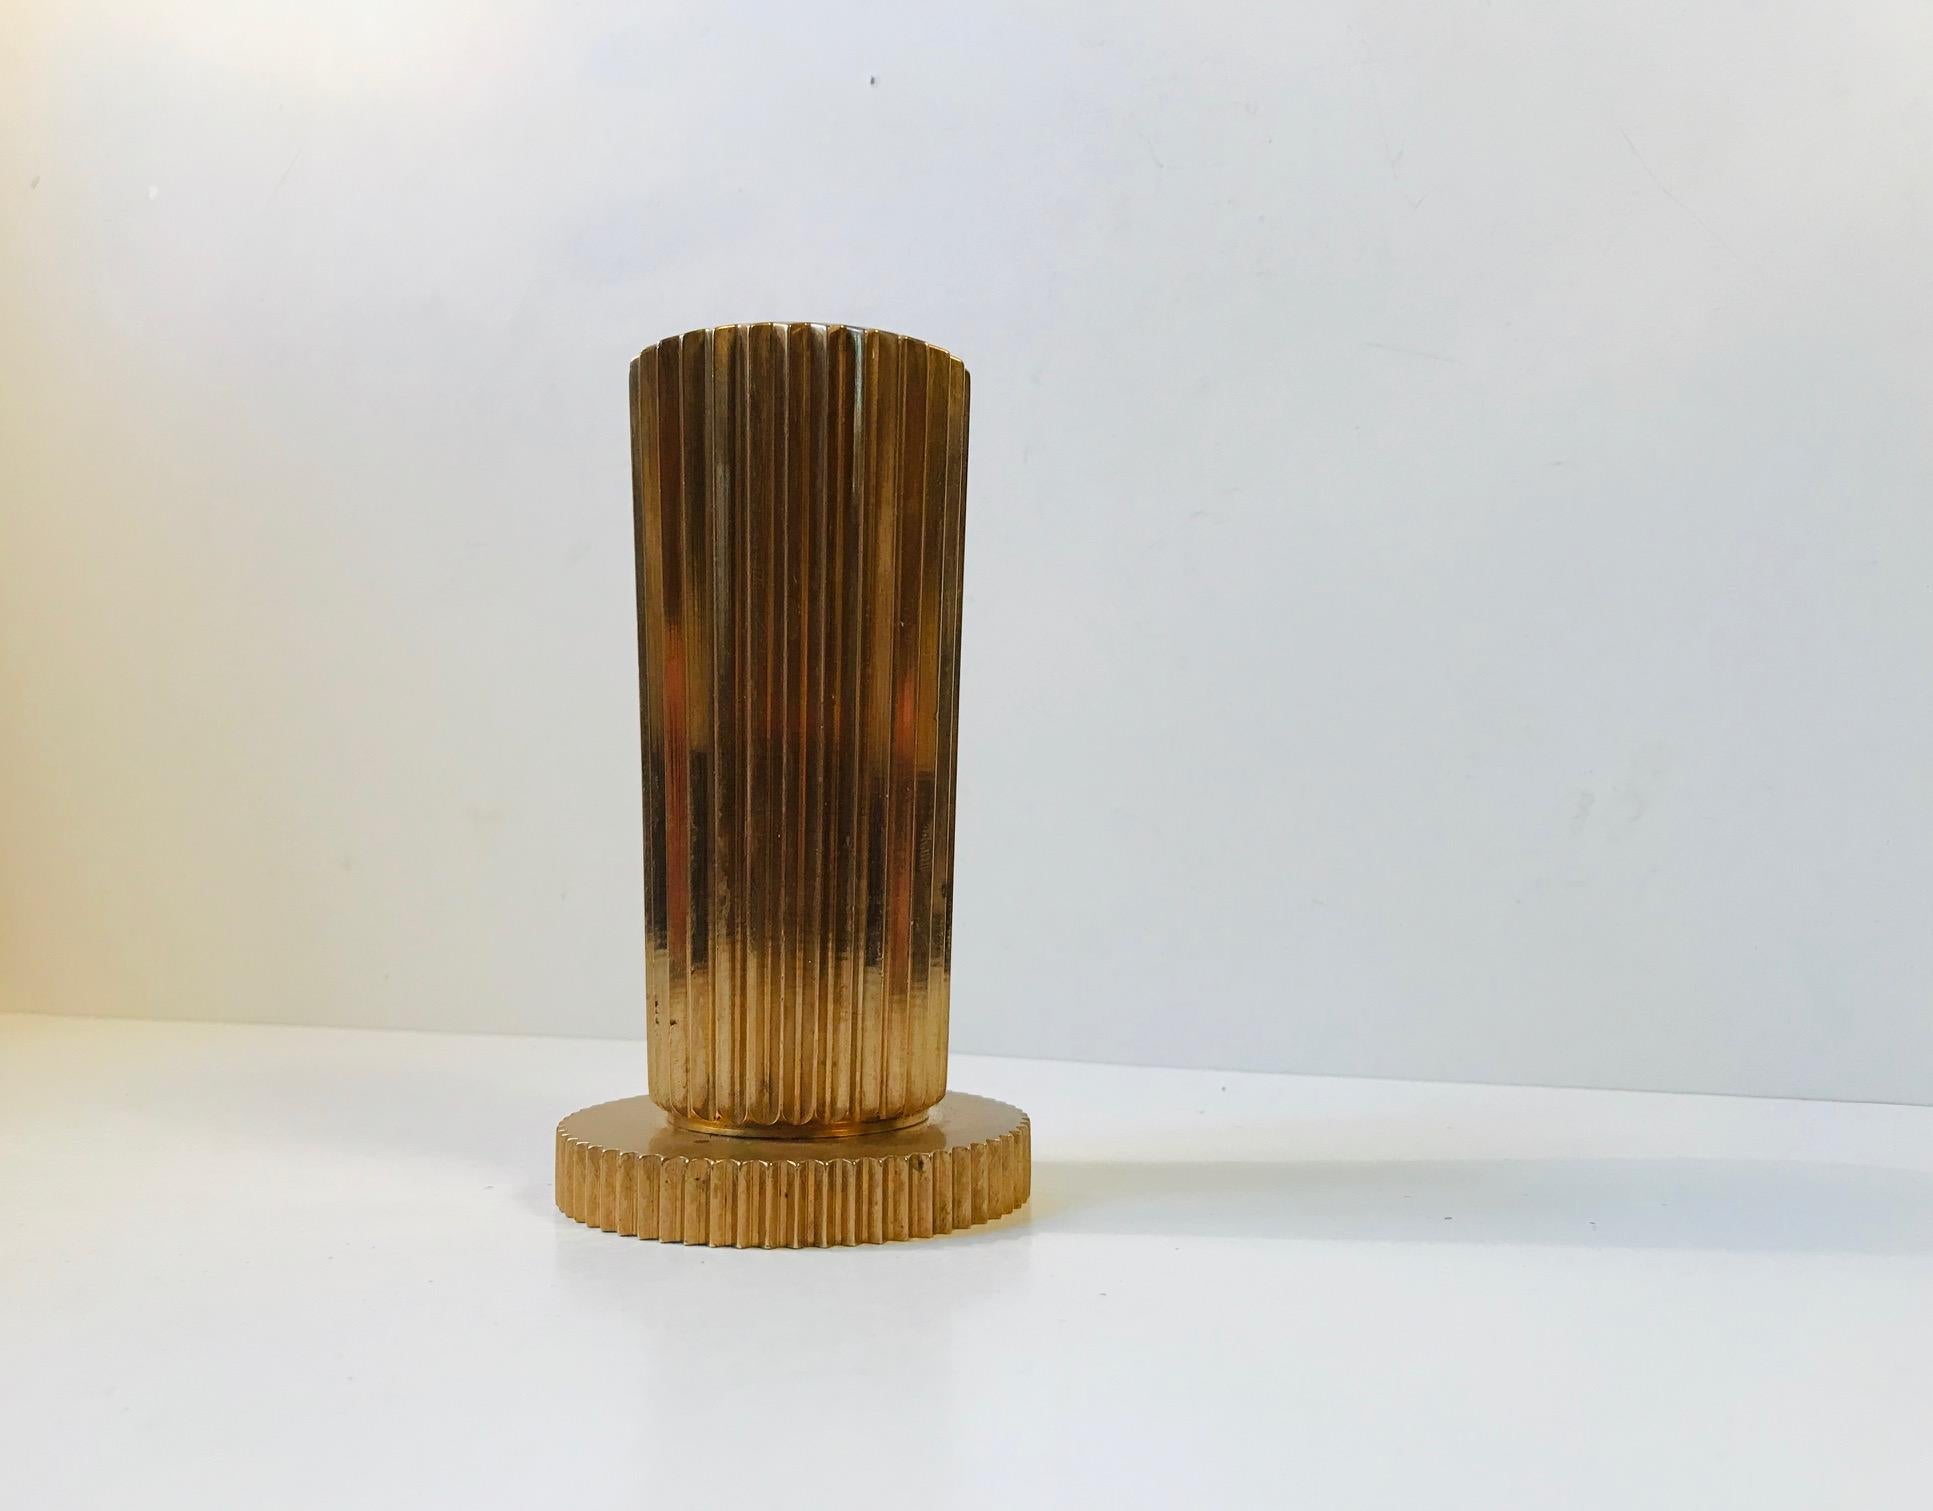 Fluted cylindrical bronze vase with a circular base. It was designed and manufactured by Tinos in Denmark during the 1930s.